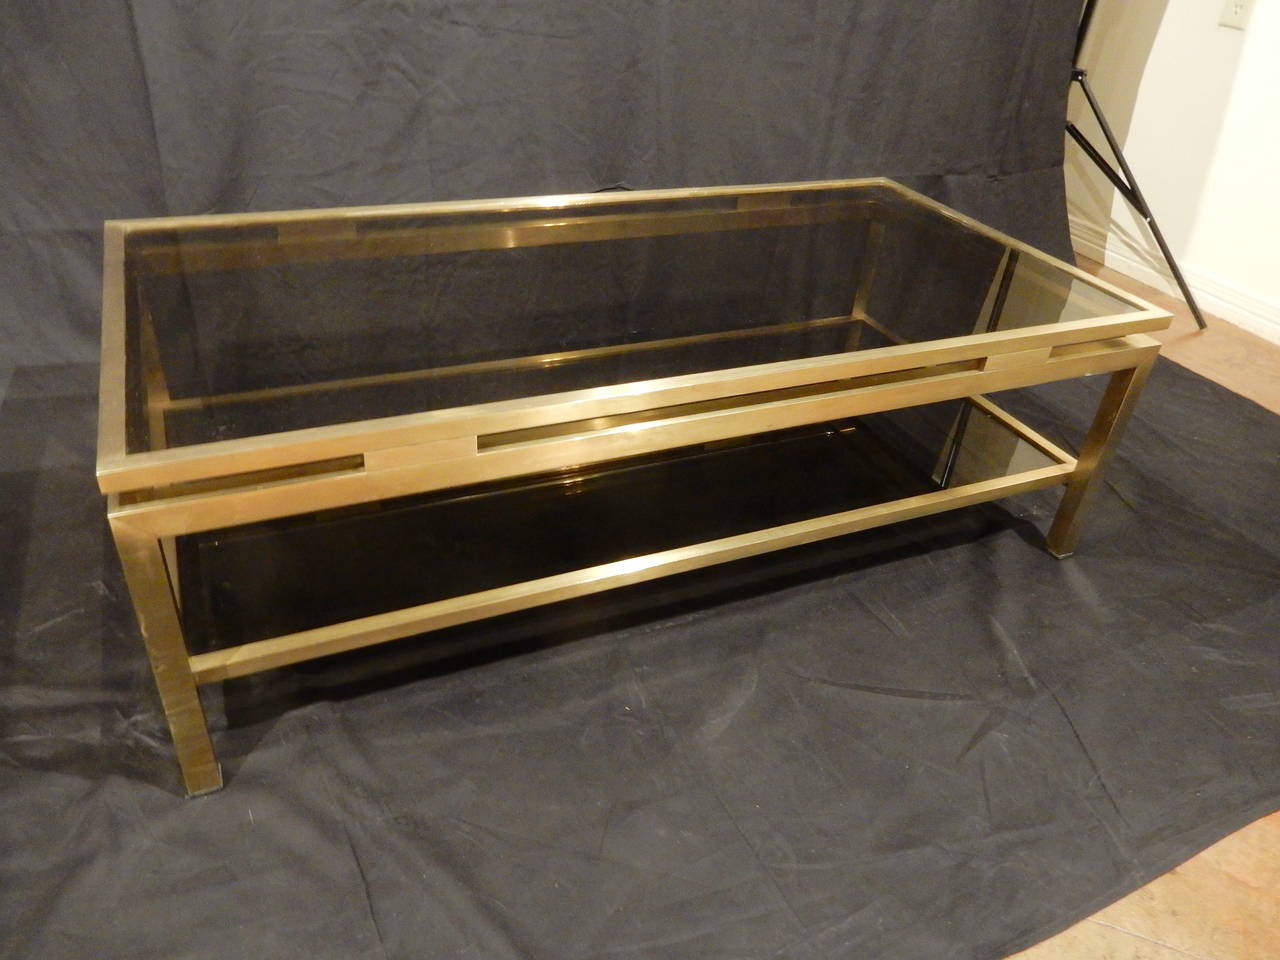 Guy  Lefevre quality brass coffee table with smoked glass on top and shelf. Not many with bottom shelf.